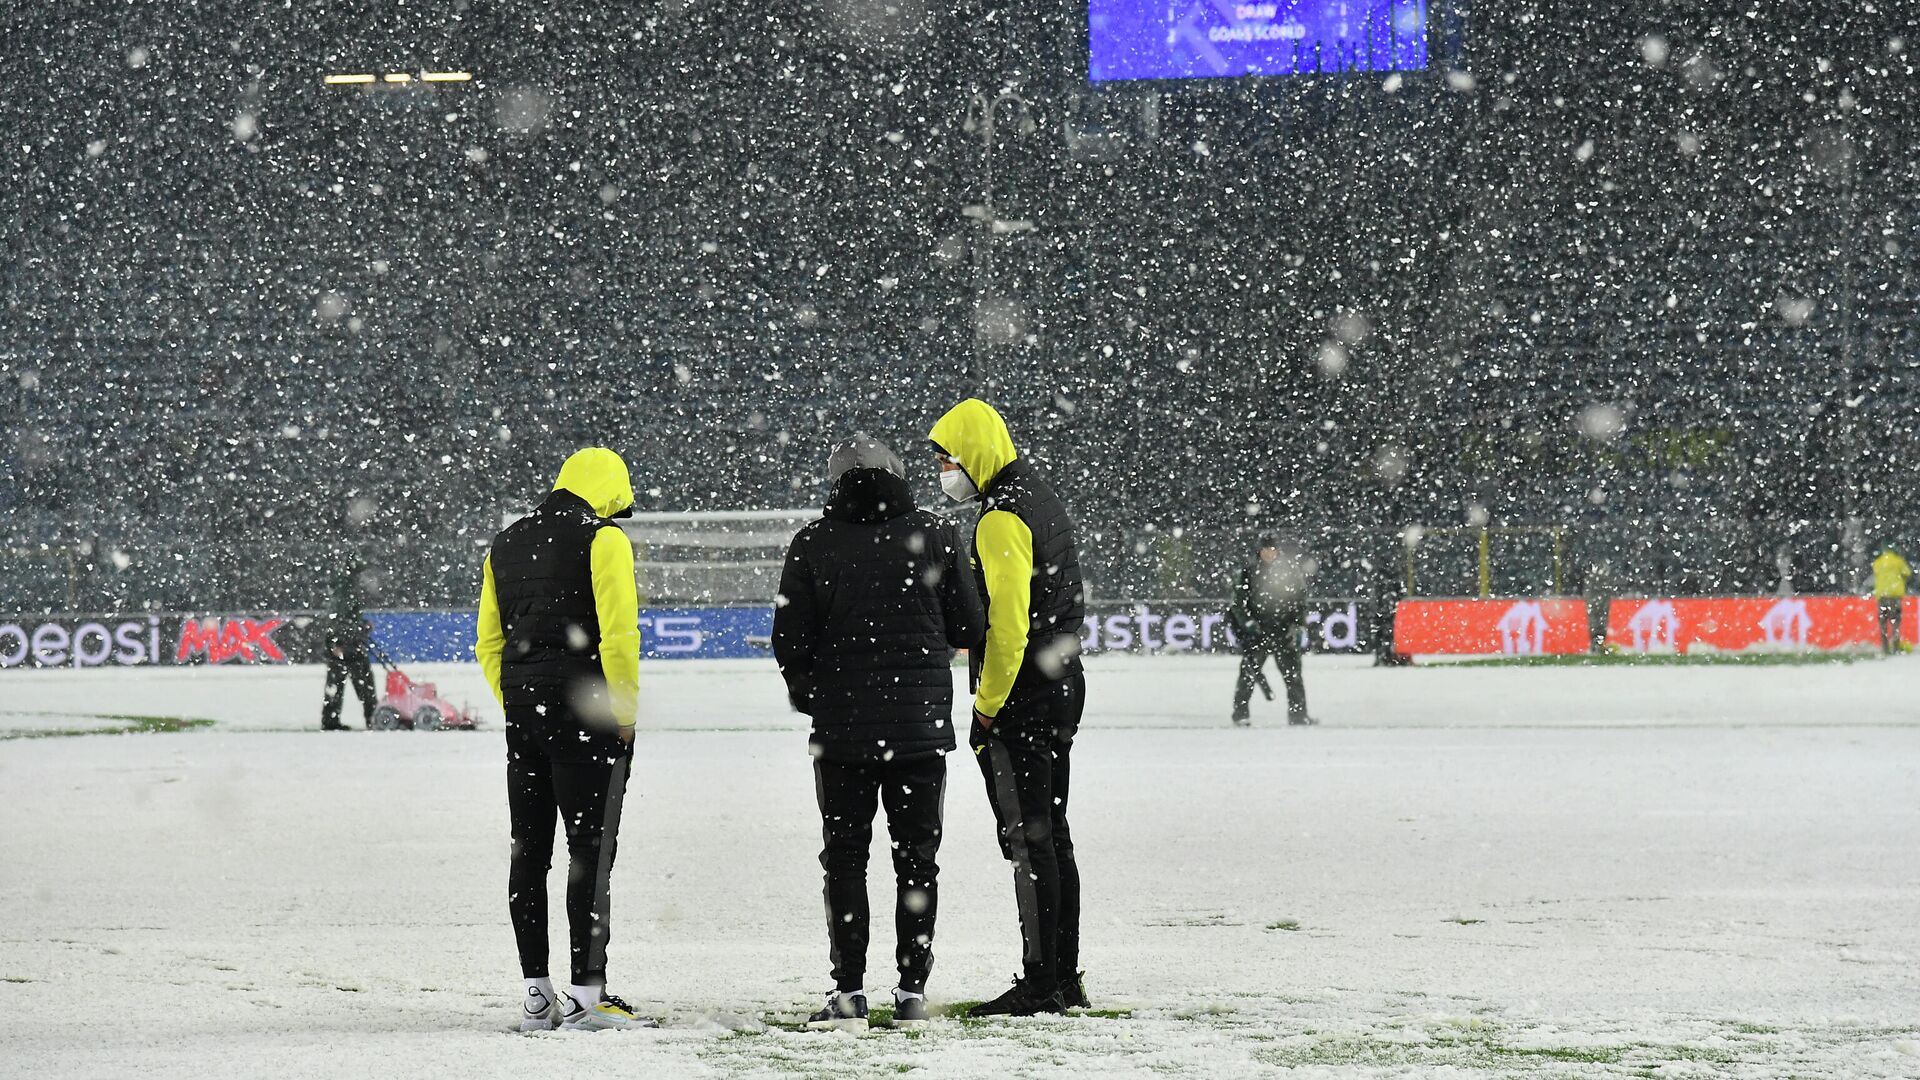 Villarreal players inspect the pitch to assess playing possibilities as snow continues falling ahead the UEFA Champions League Group F football match between Atalanta and Villarreal on December 8, 2021 at the Atleti Azzurri d'Italia stadium in Bergamo. (Photo by Isabella BONOTTO / AFP) - РИА Новости, 1920, 08.12.2021